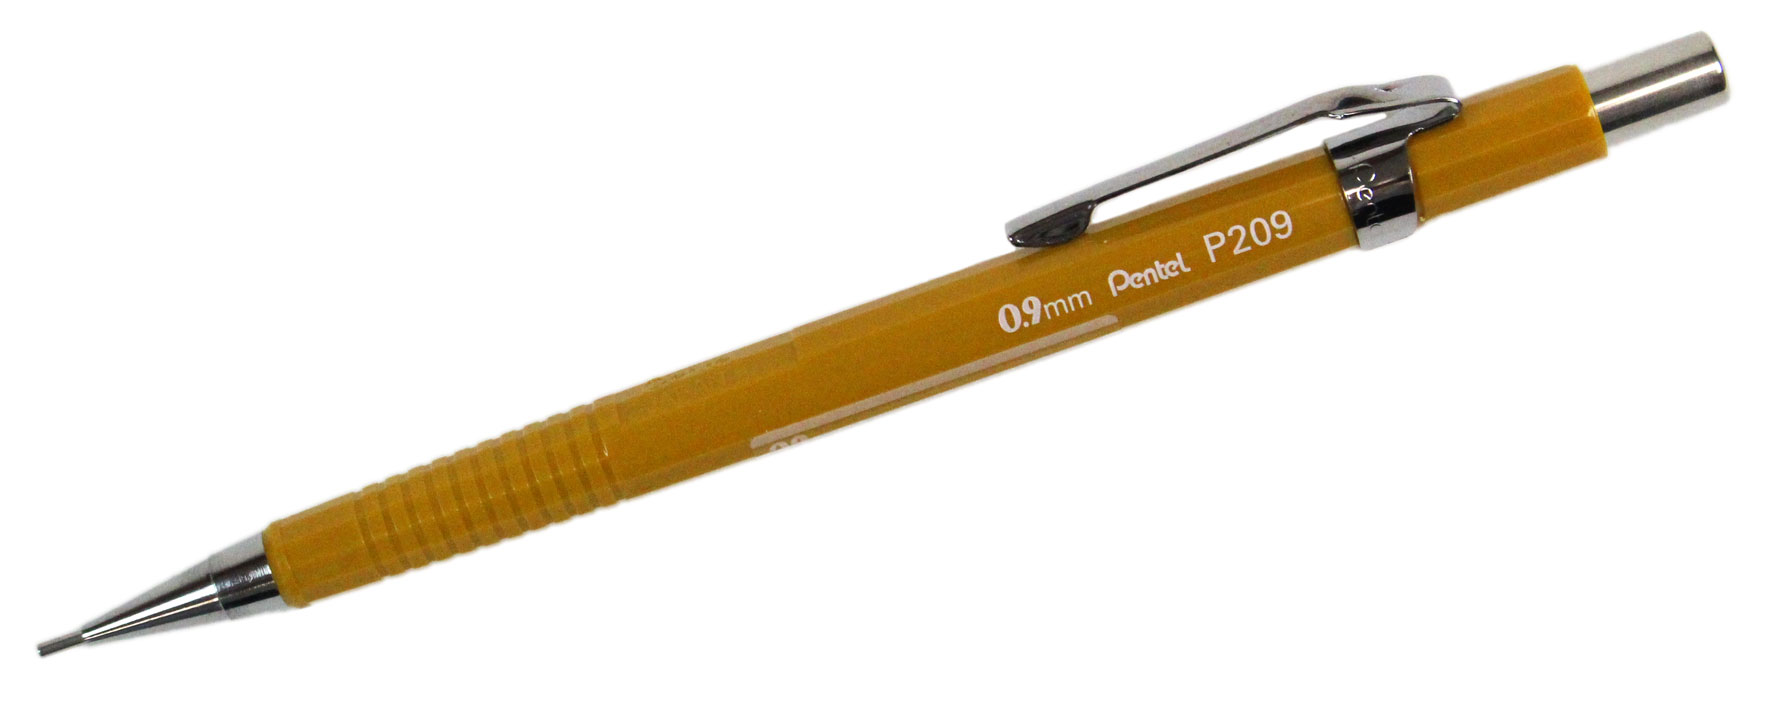 2/Pack Yellow Barrel Mechanical Drafting Pencil - New 2.81 x 0.5 x 7.25 inches 0.9 mm 